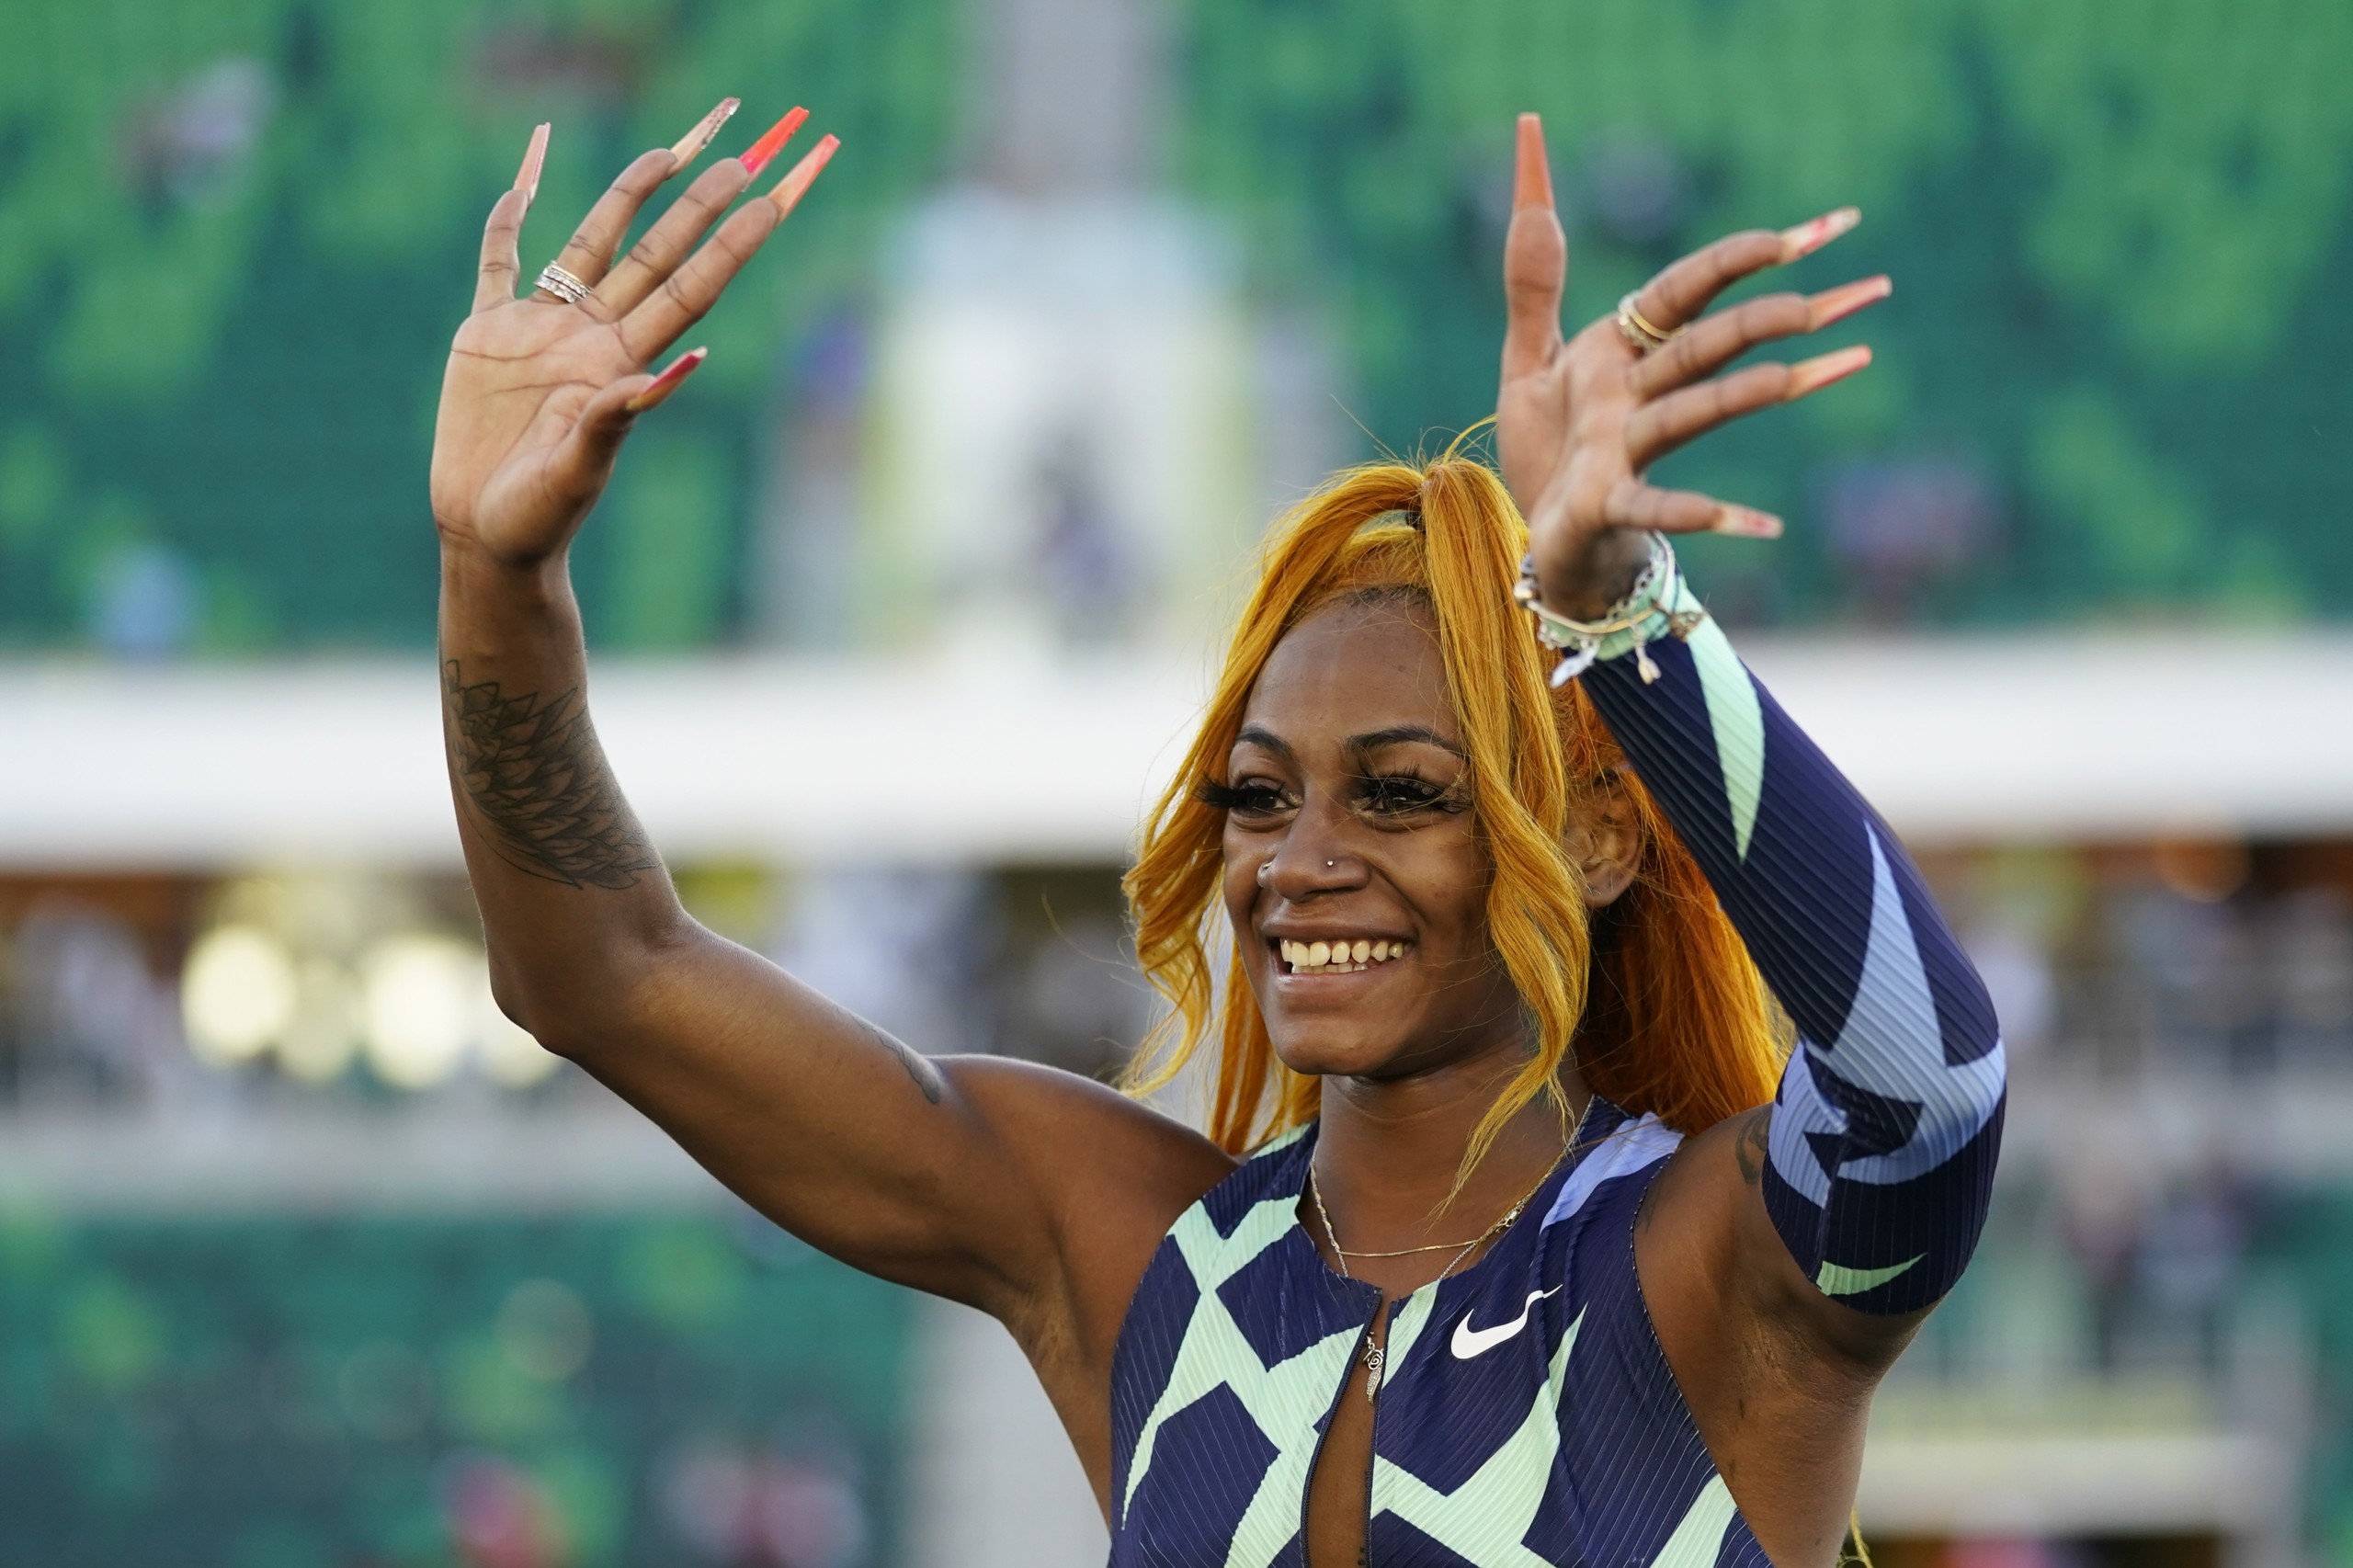 Sha'Carri Richardson waves after winning the women's 100-meter run at the U.S. Olympic Track and Field Trials Saturday, June 19, 2021, in Eugene, Ore. (AP Photo/Ashley Landis)